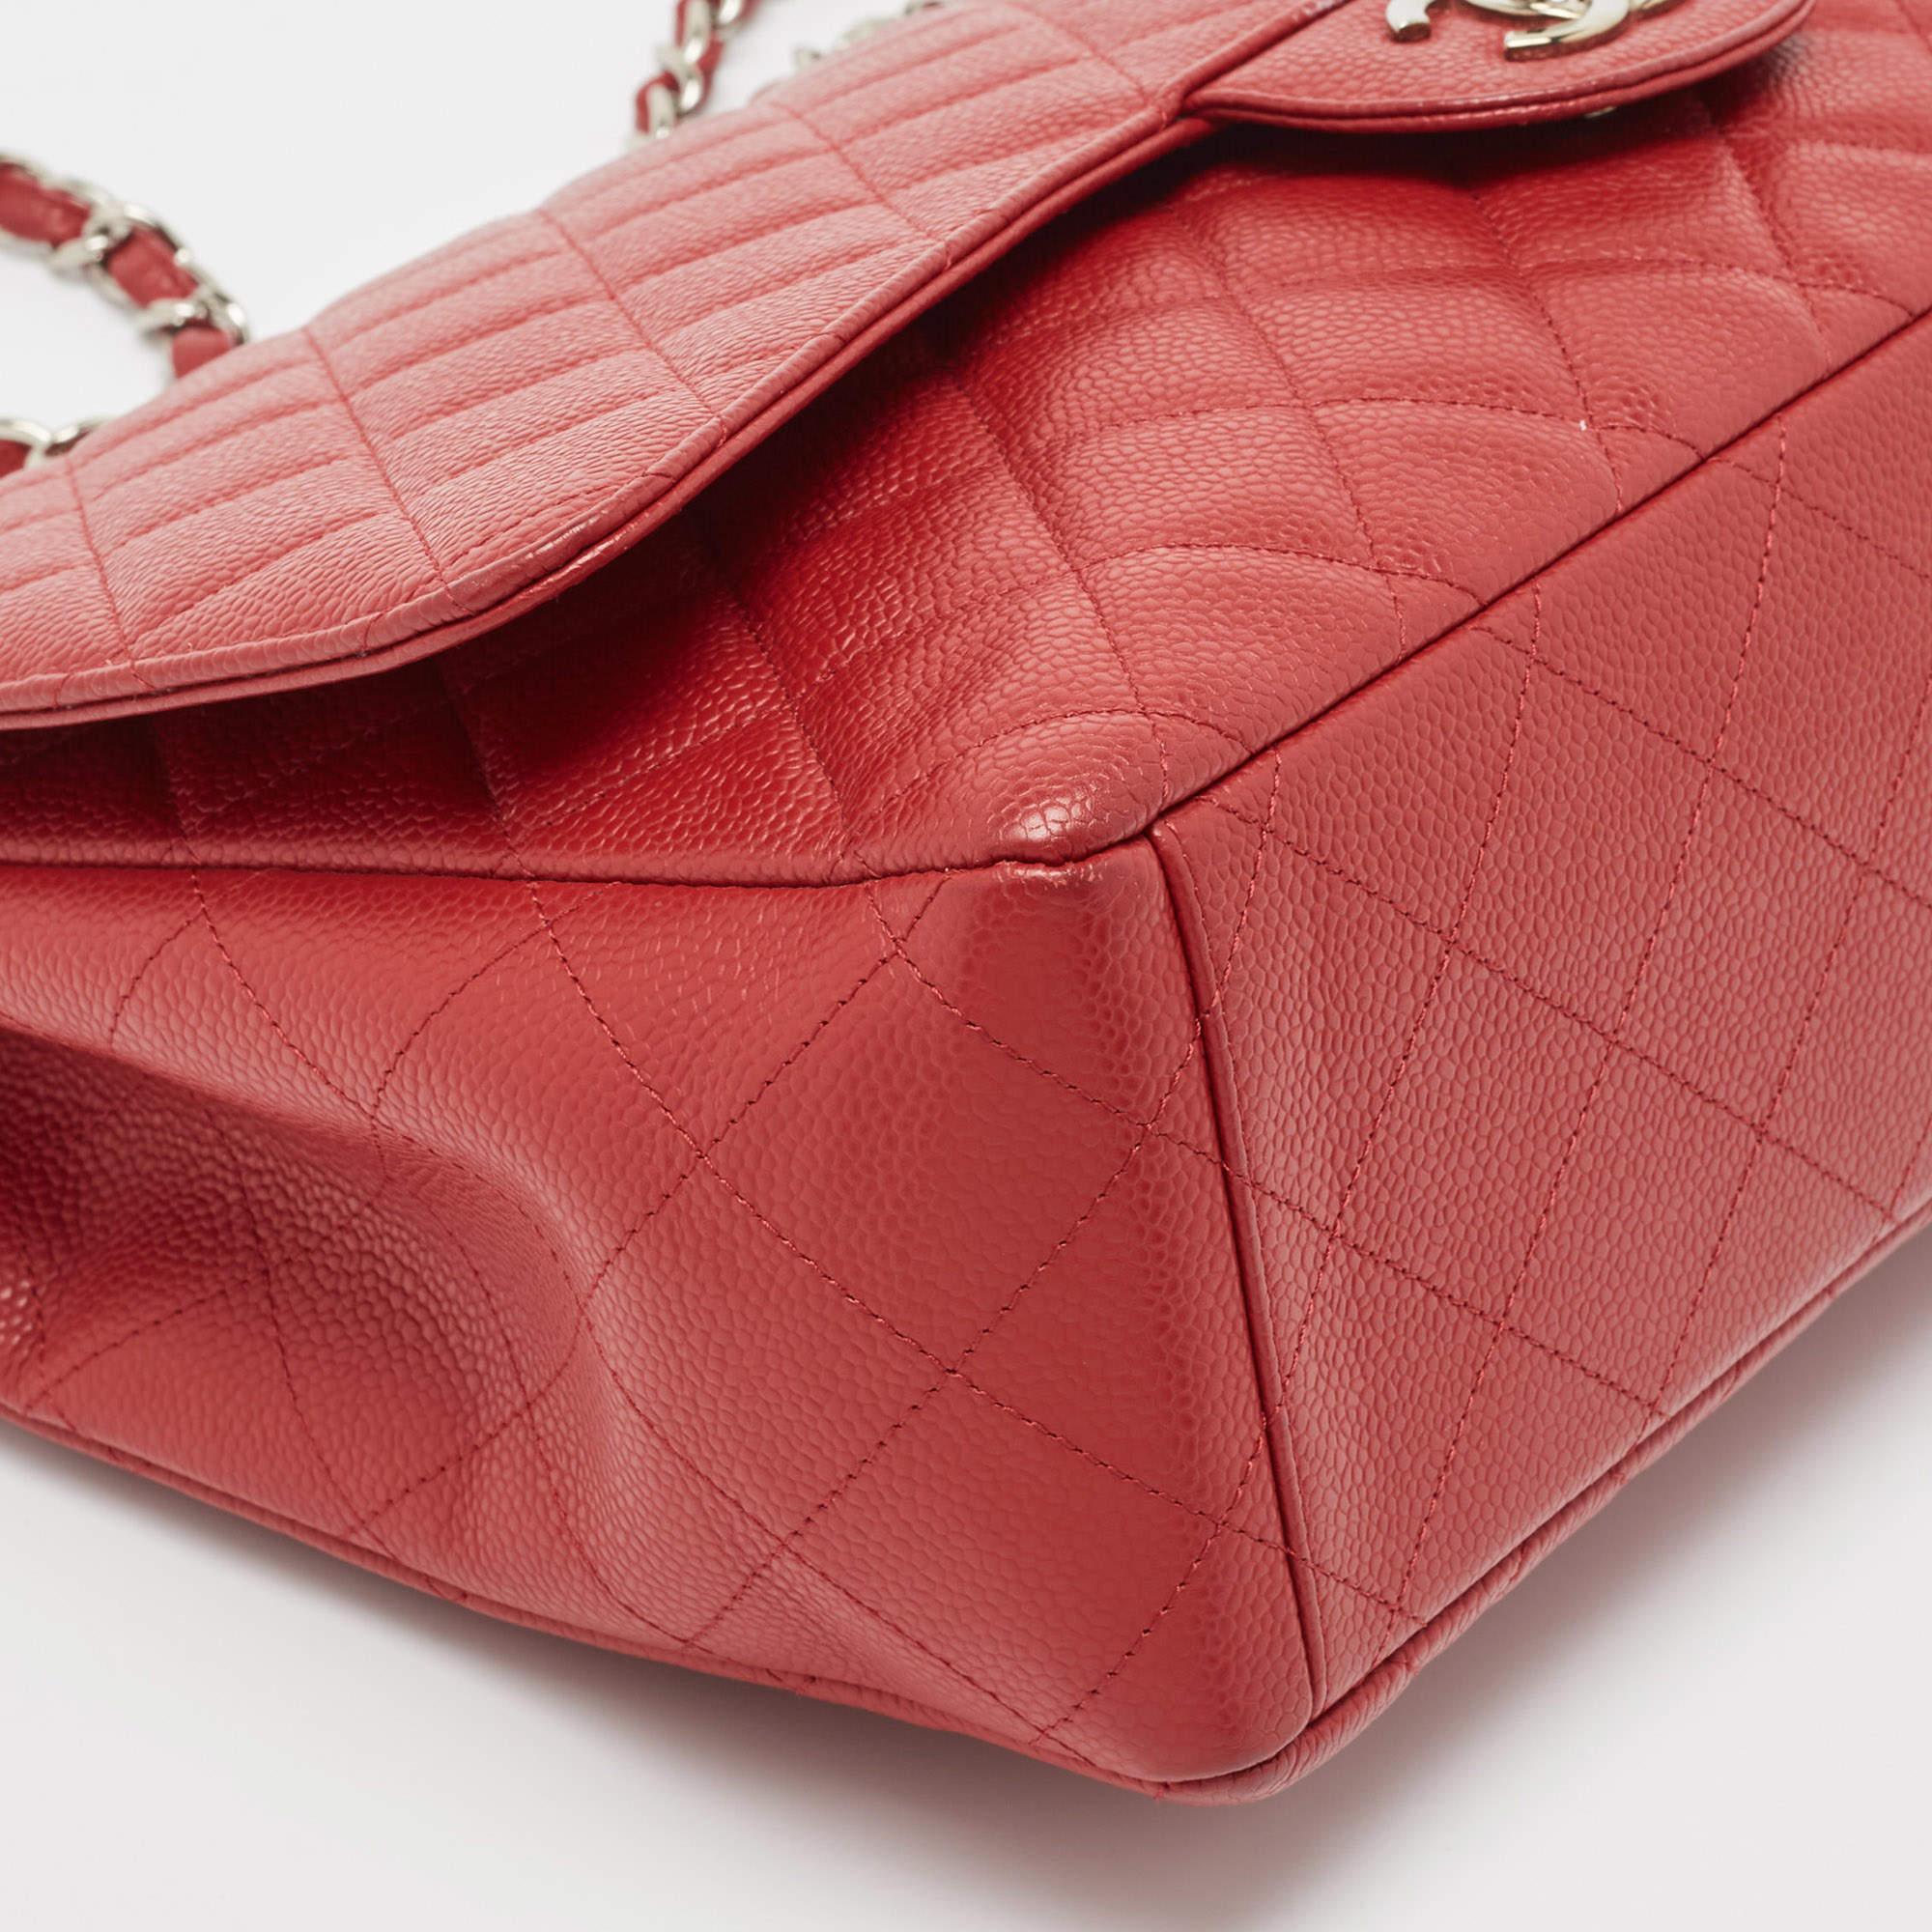 Chanel Red Caviar Leather Maxi Classic Double Flap Bag For Sale 10